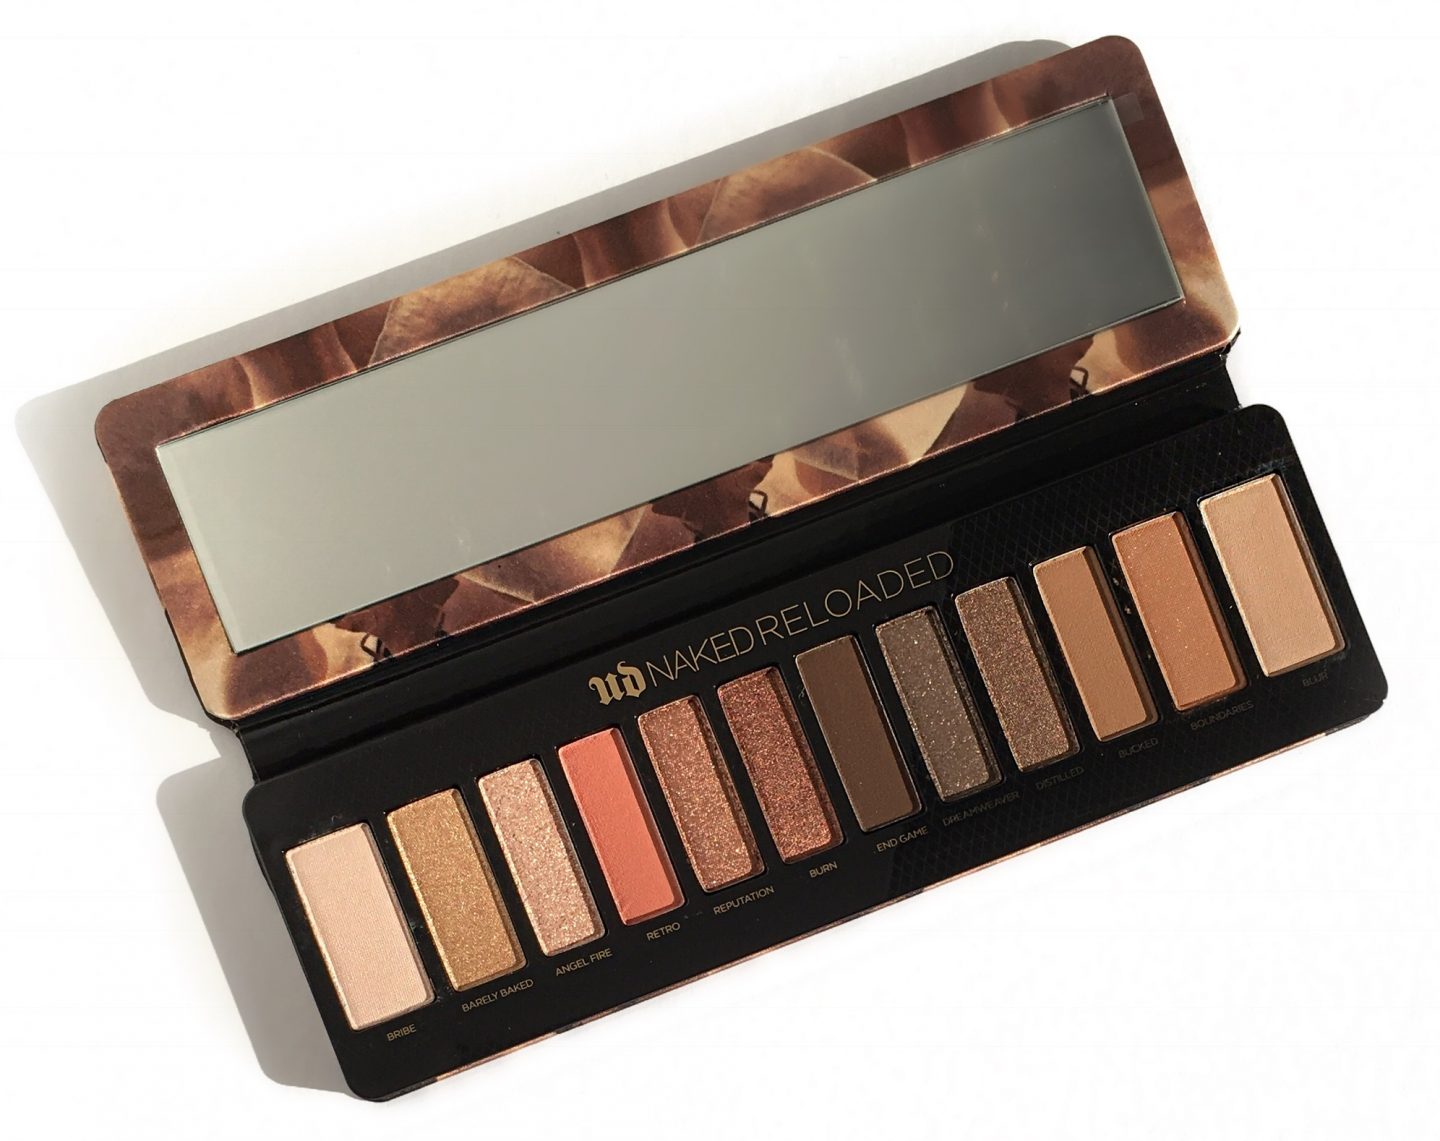 Urban Decay Naked Reloaded